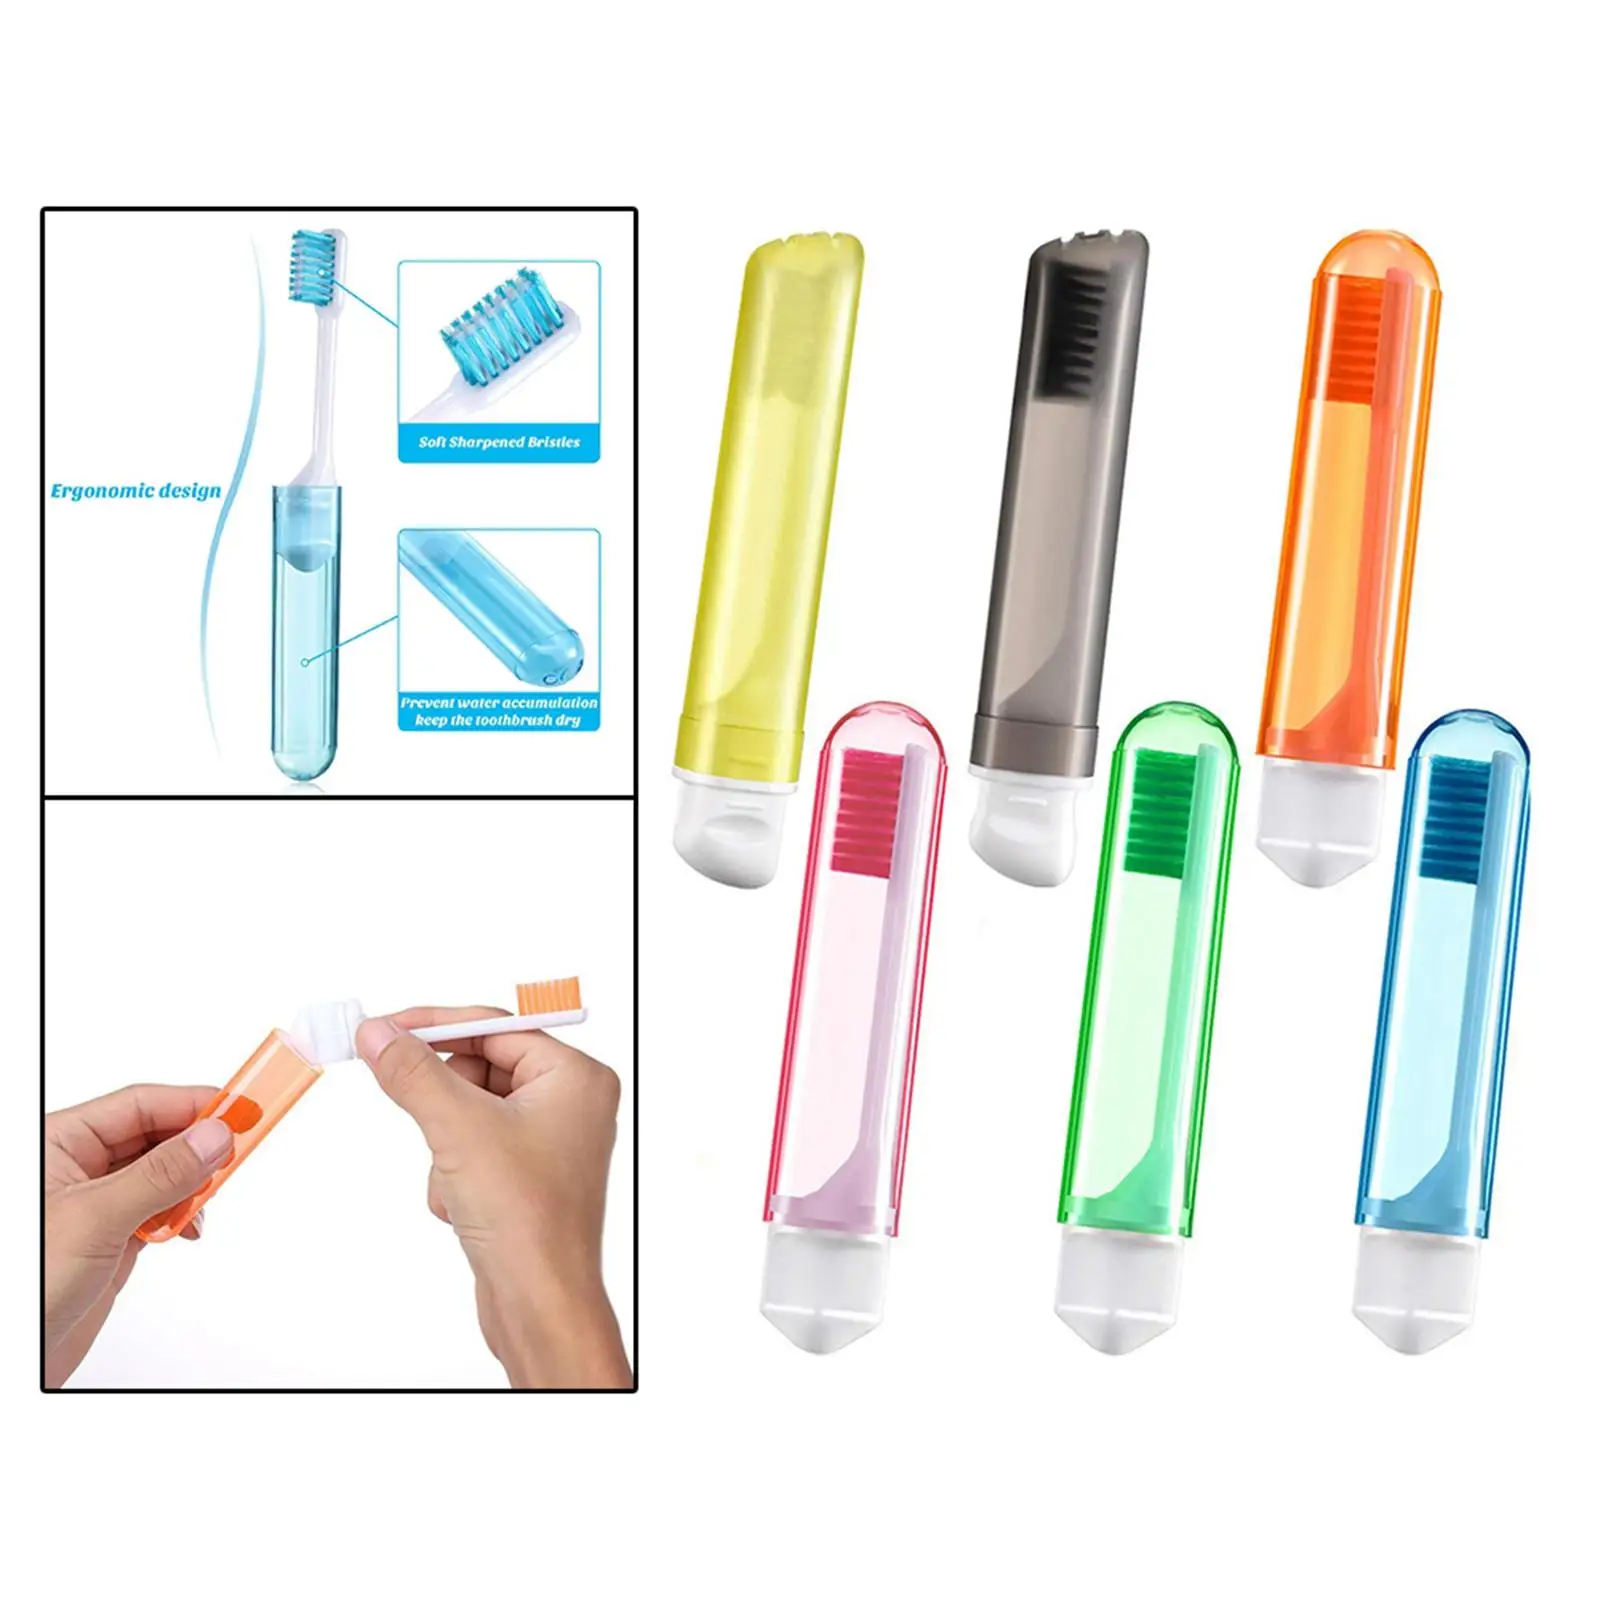 6 Pcs Portable Folding Toothbrush Practical Pocket Size Travelling Toothbrush for Camping Holidays Business Girl Boy Kids Adults